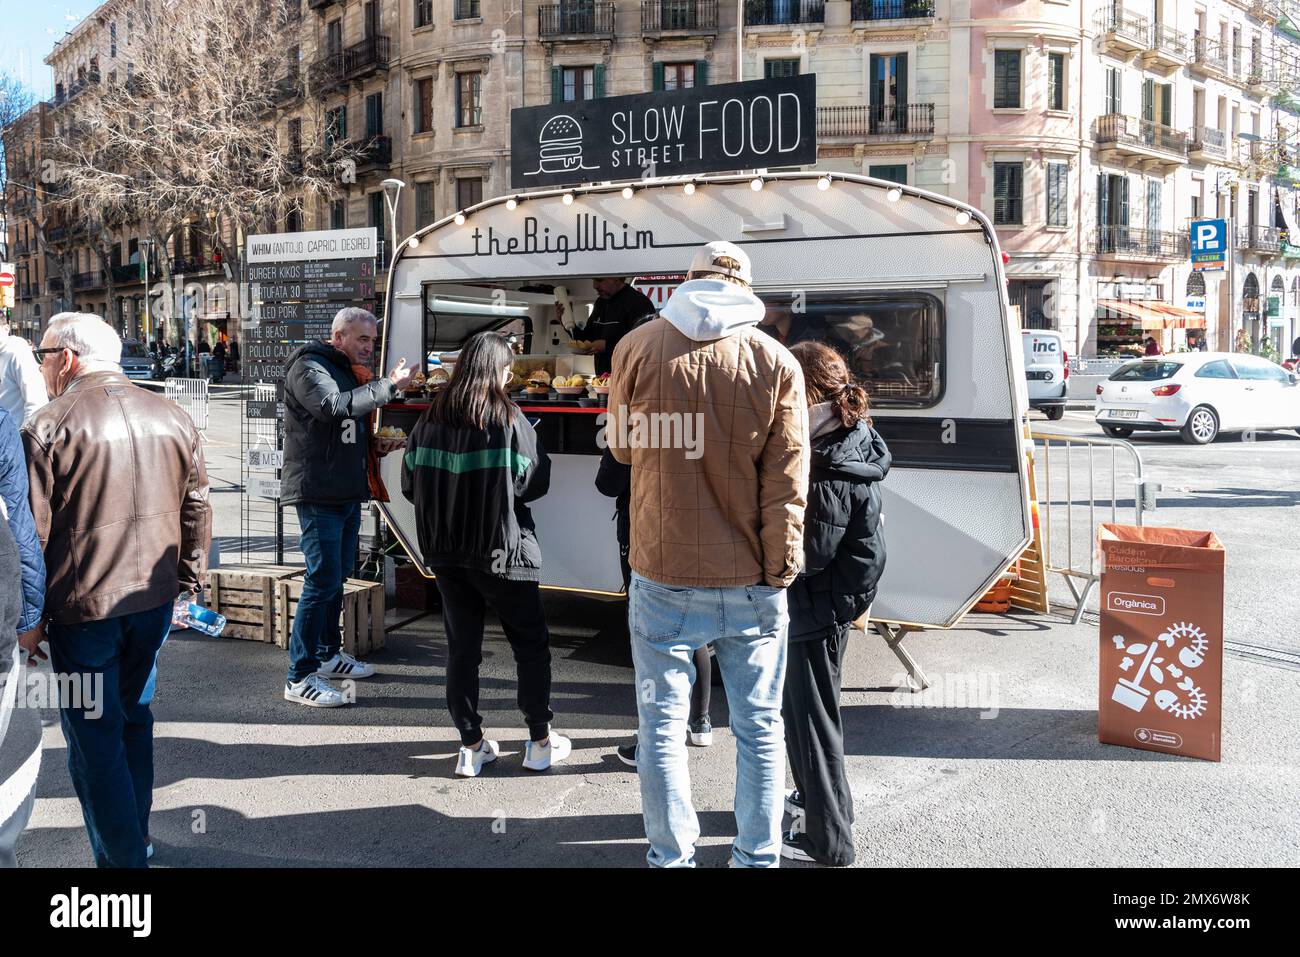 Barcelona, Spain - January 21, 2023: Classic caravan adapted for the sale of fast food on the street with several people waiting Stock Photo